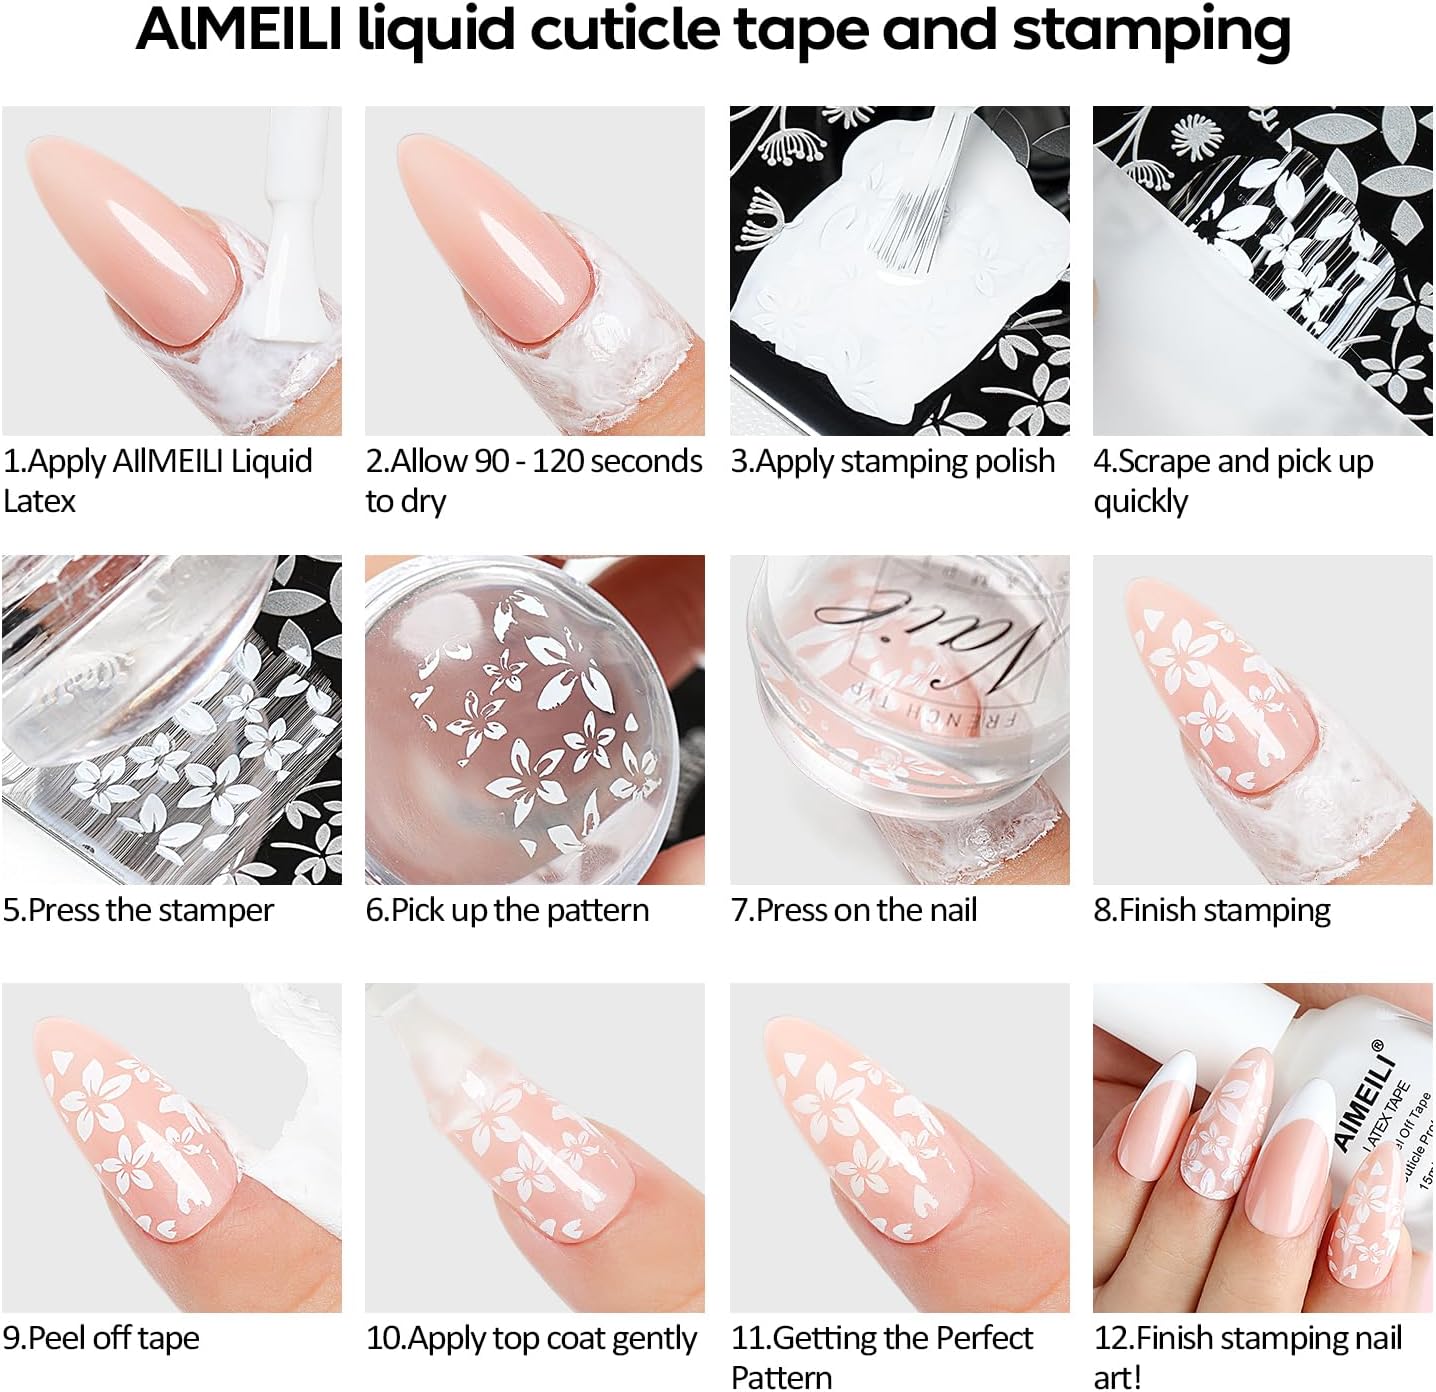 how to use nail stamps